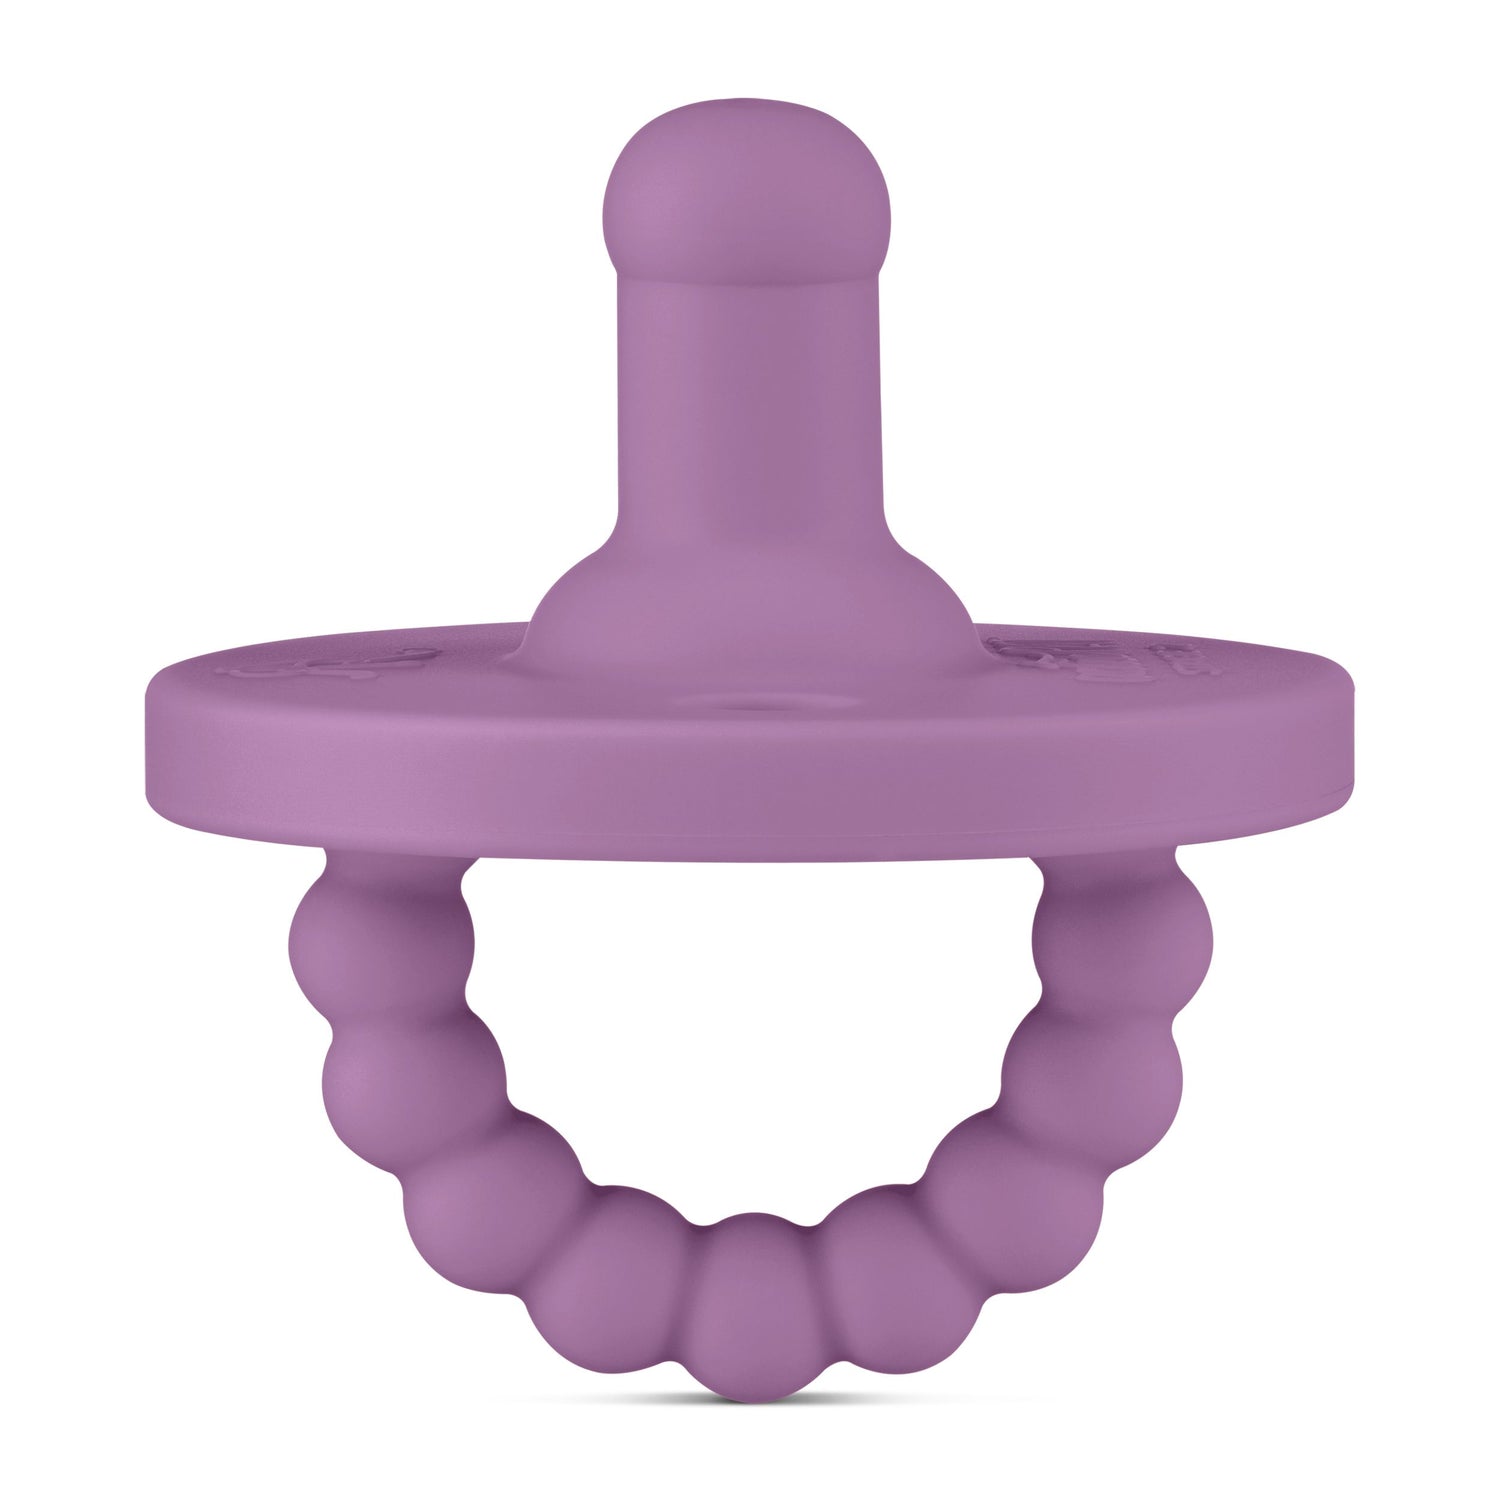 Cutie PAT Round (0-24m) Pacifier + Teether